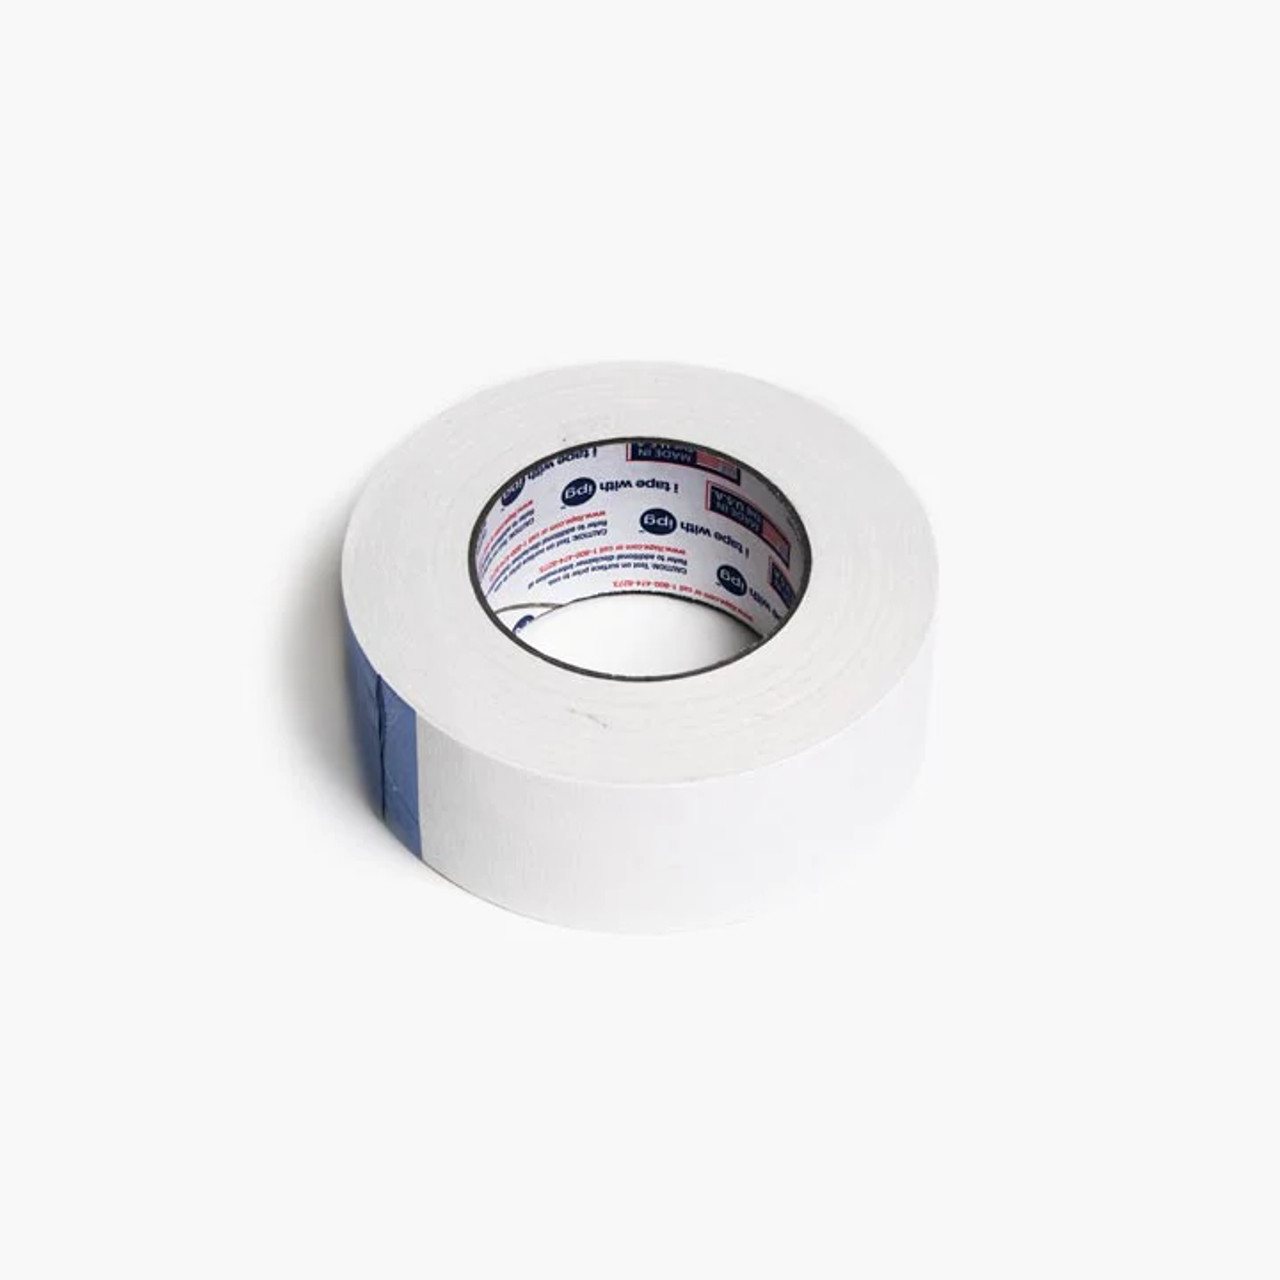 Shaper 2 Double-Sided Tape : The Strong and Reliable Tape That Will  Improve the Accuracy of Your CNC Woodworking Projects